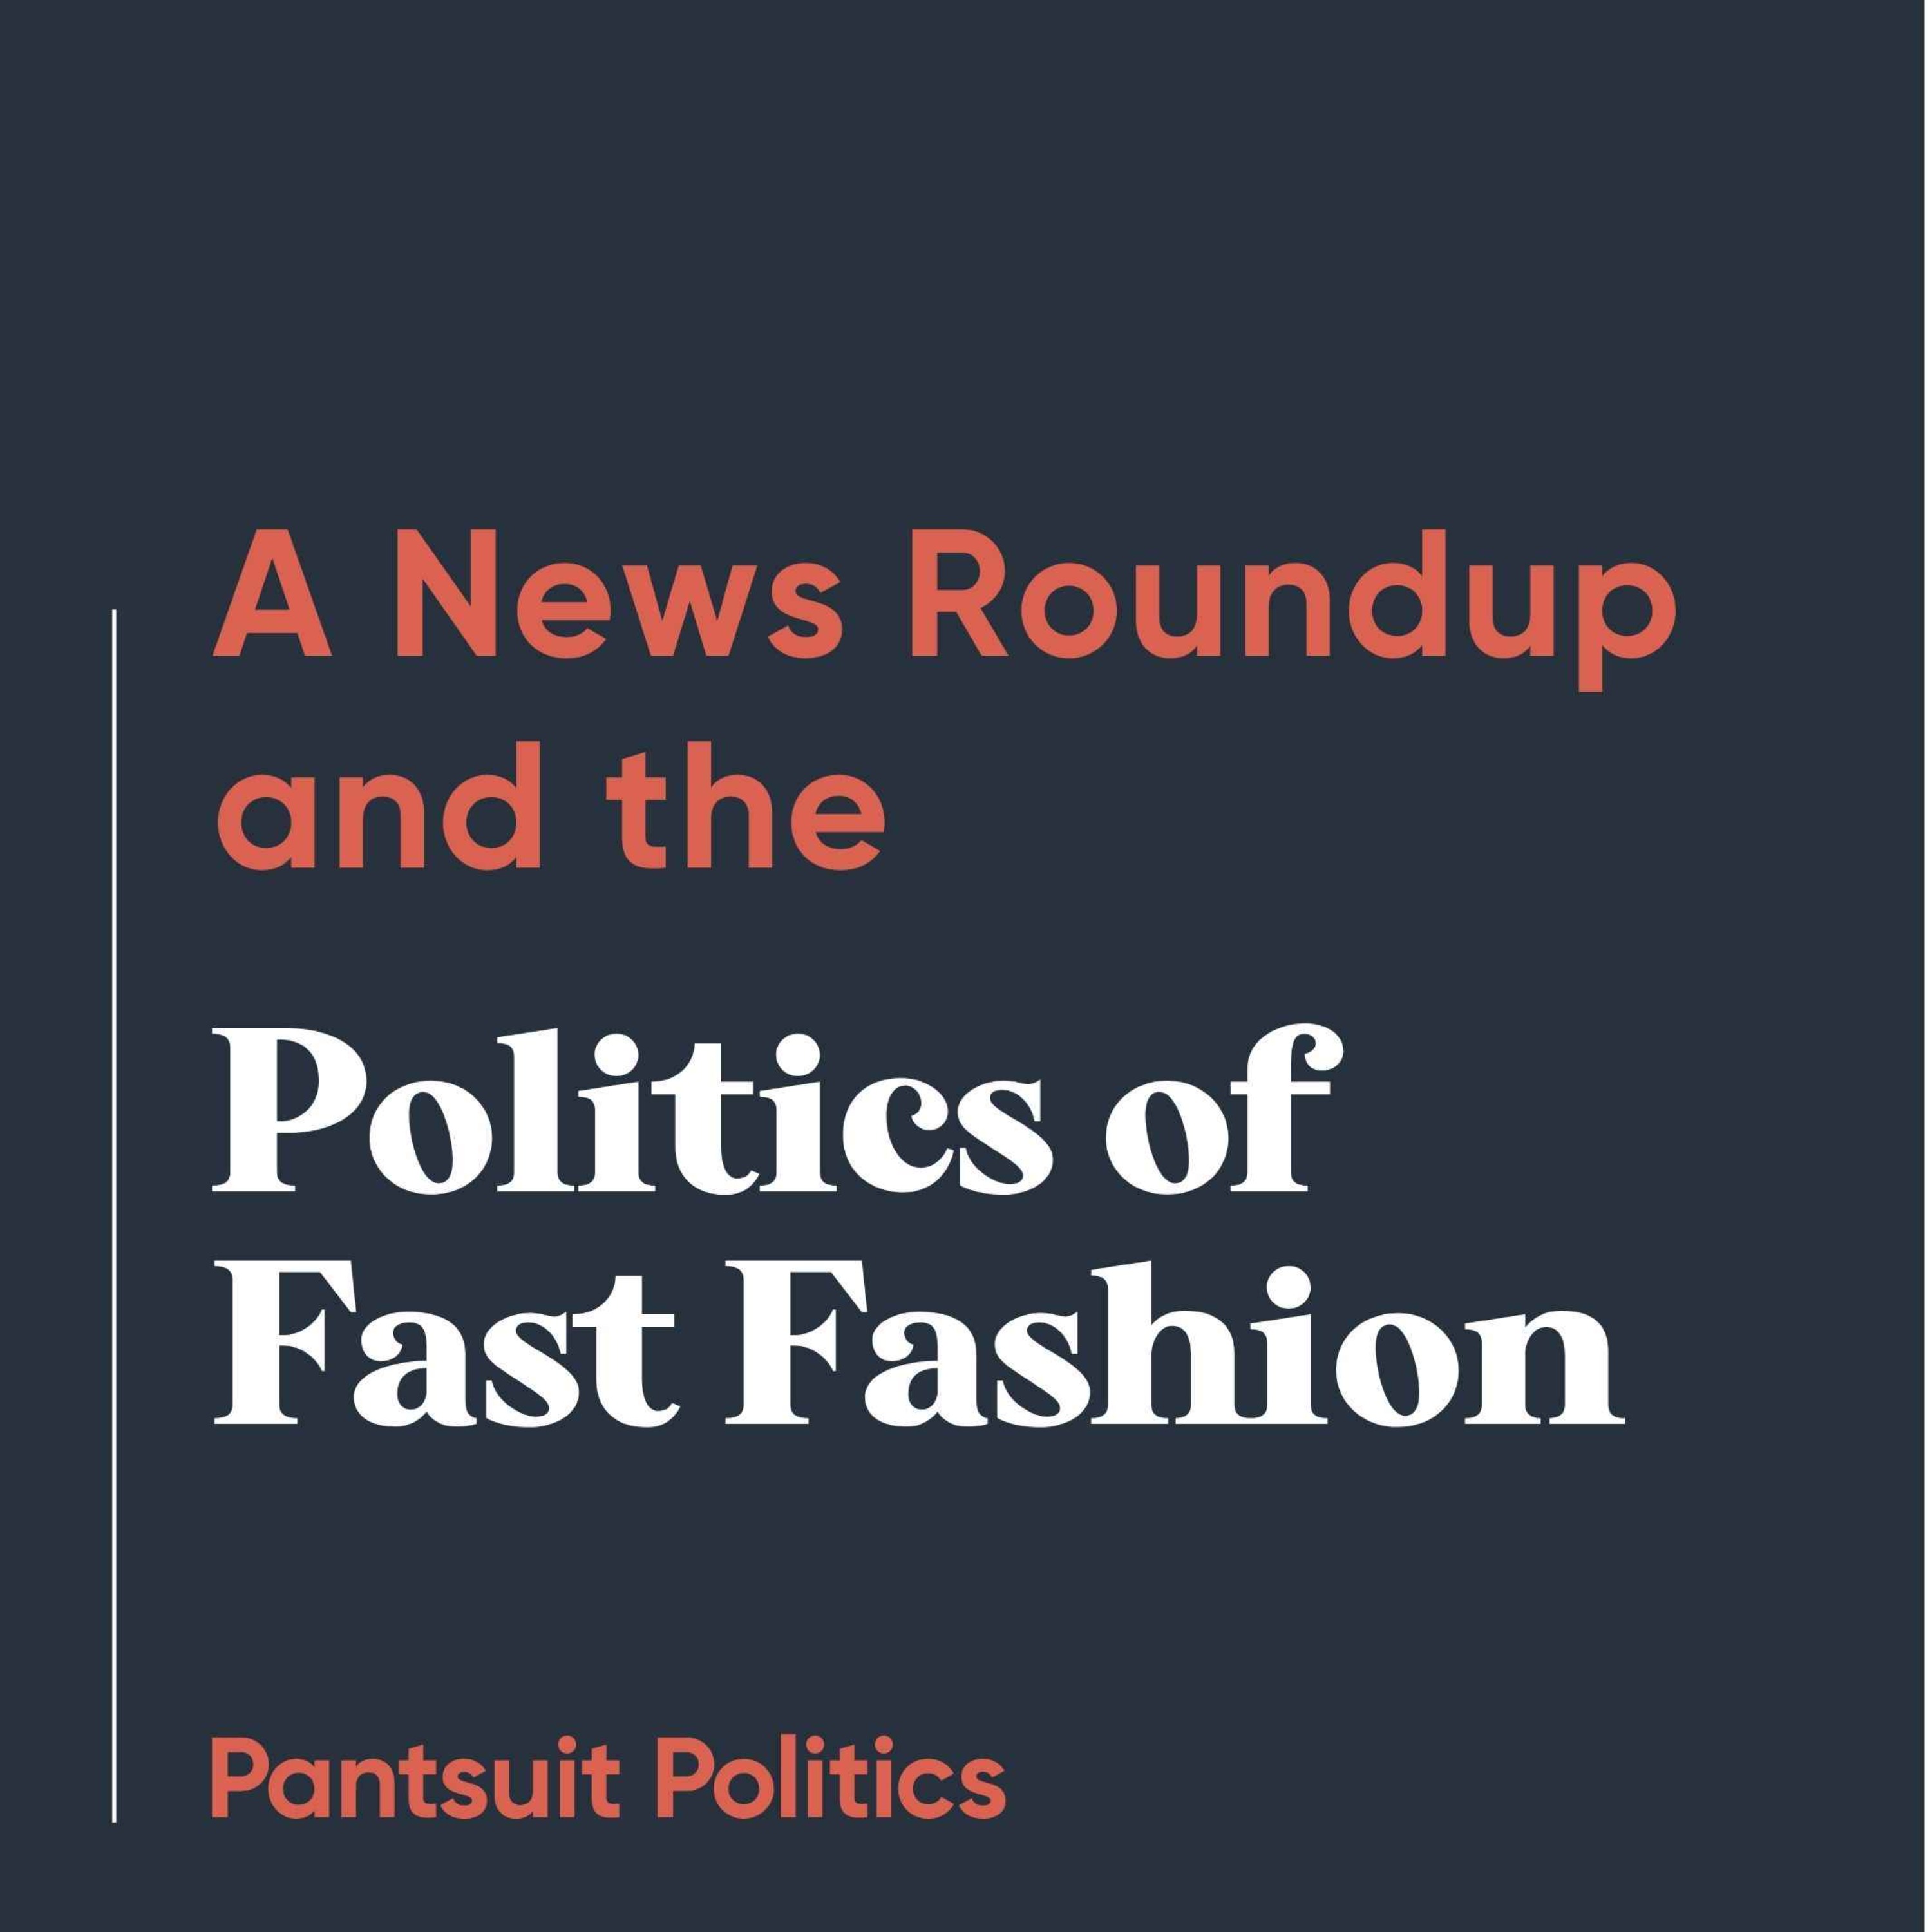 A News Roundup and the Politics of Fast Fashion